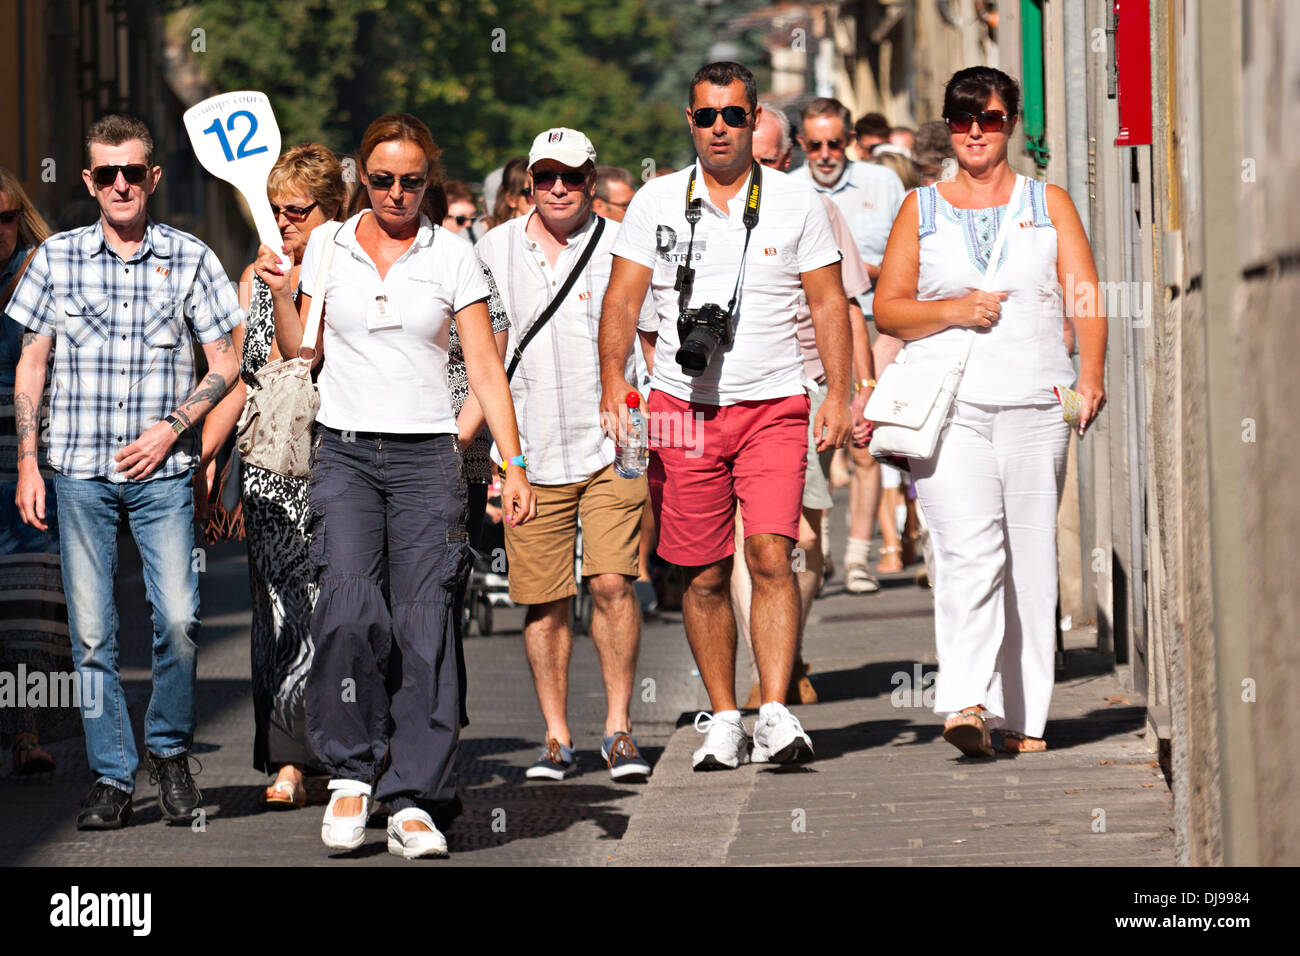 Tourist group with female guide holding a paddle with number 12, Florence, Italy Stock Photo